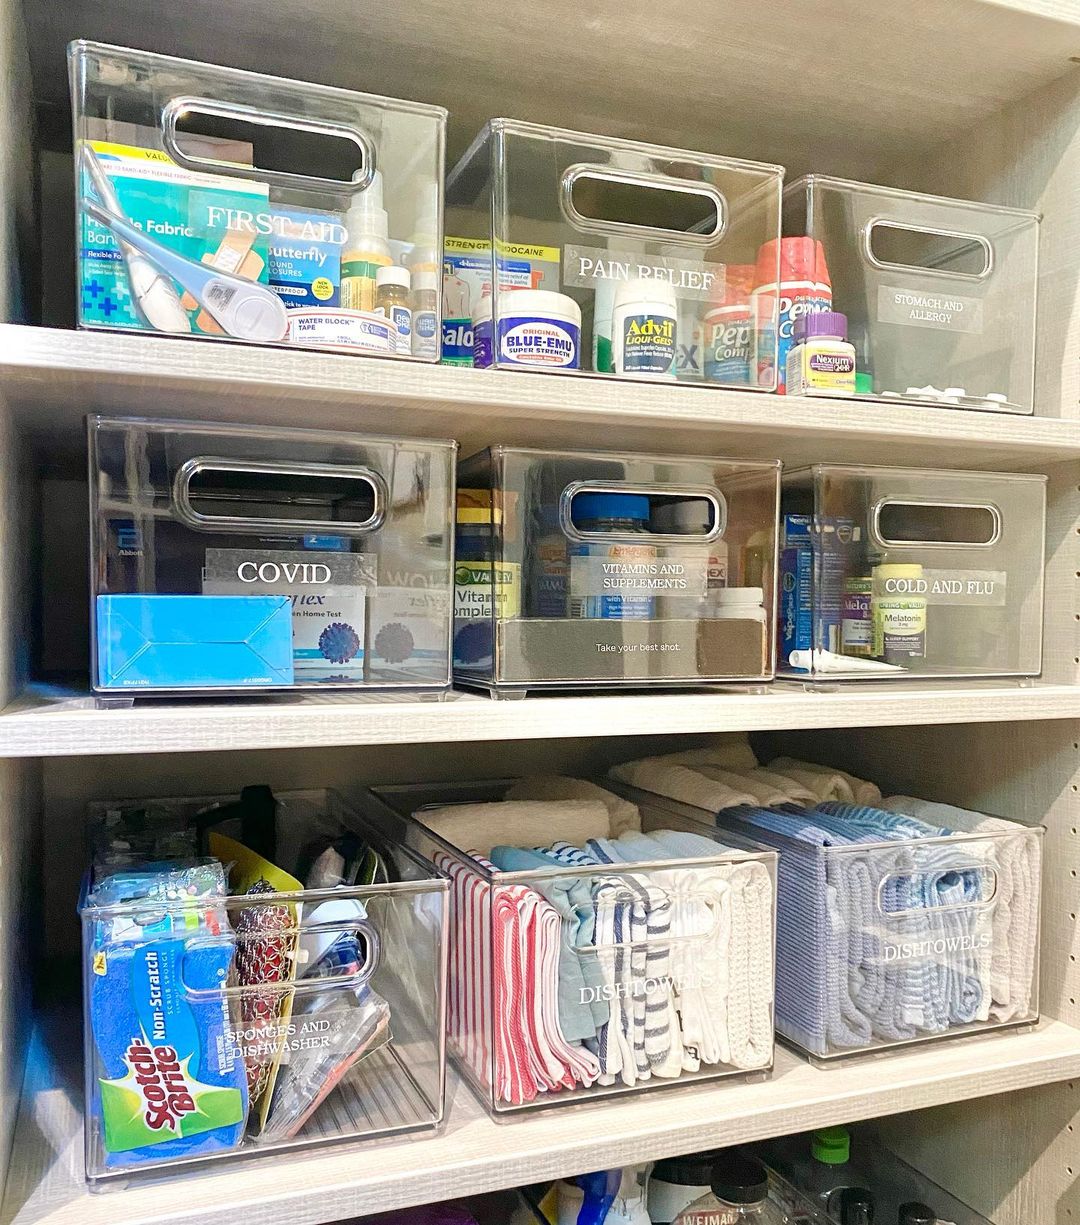 Organized shelf with cleaning supplies, medical supplies, medicine, and more. Photo by Instagram user @luxeorganizingsolutions